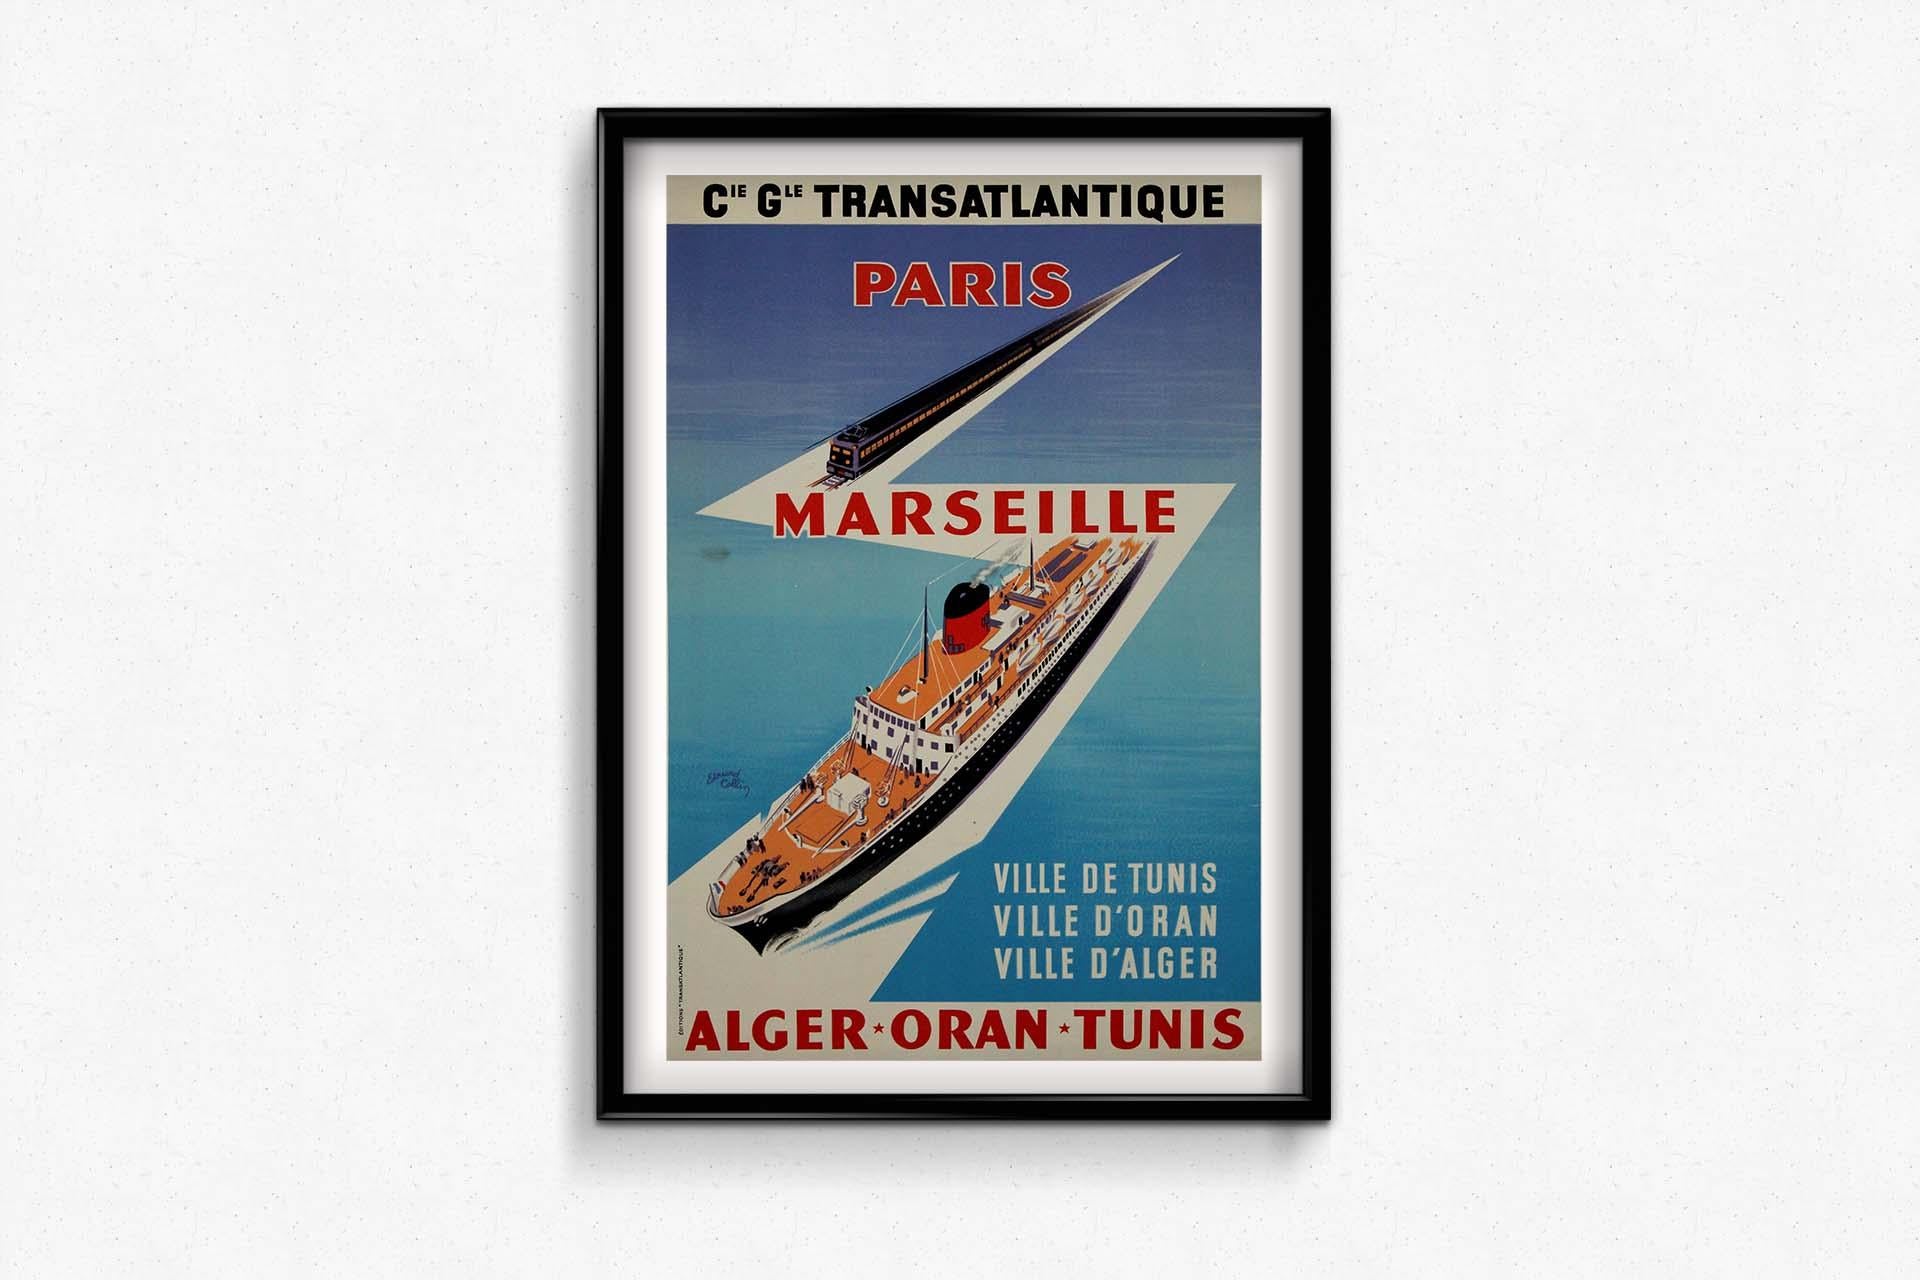 Original travel poster by Edouard Collin for the Compagnie Générale Transatlantique beckons travelers to explore the enchanting destinations of Paris, Marseille, Alger, Oran, and Tunis. Crafted with vibrant colors and captivating imagery, this